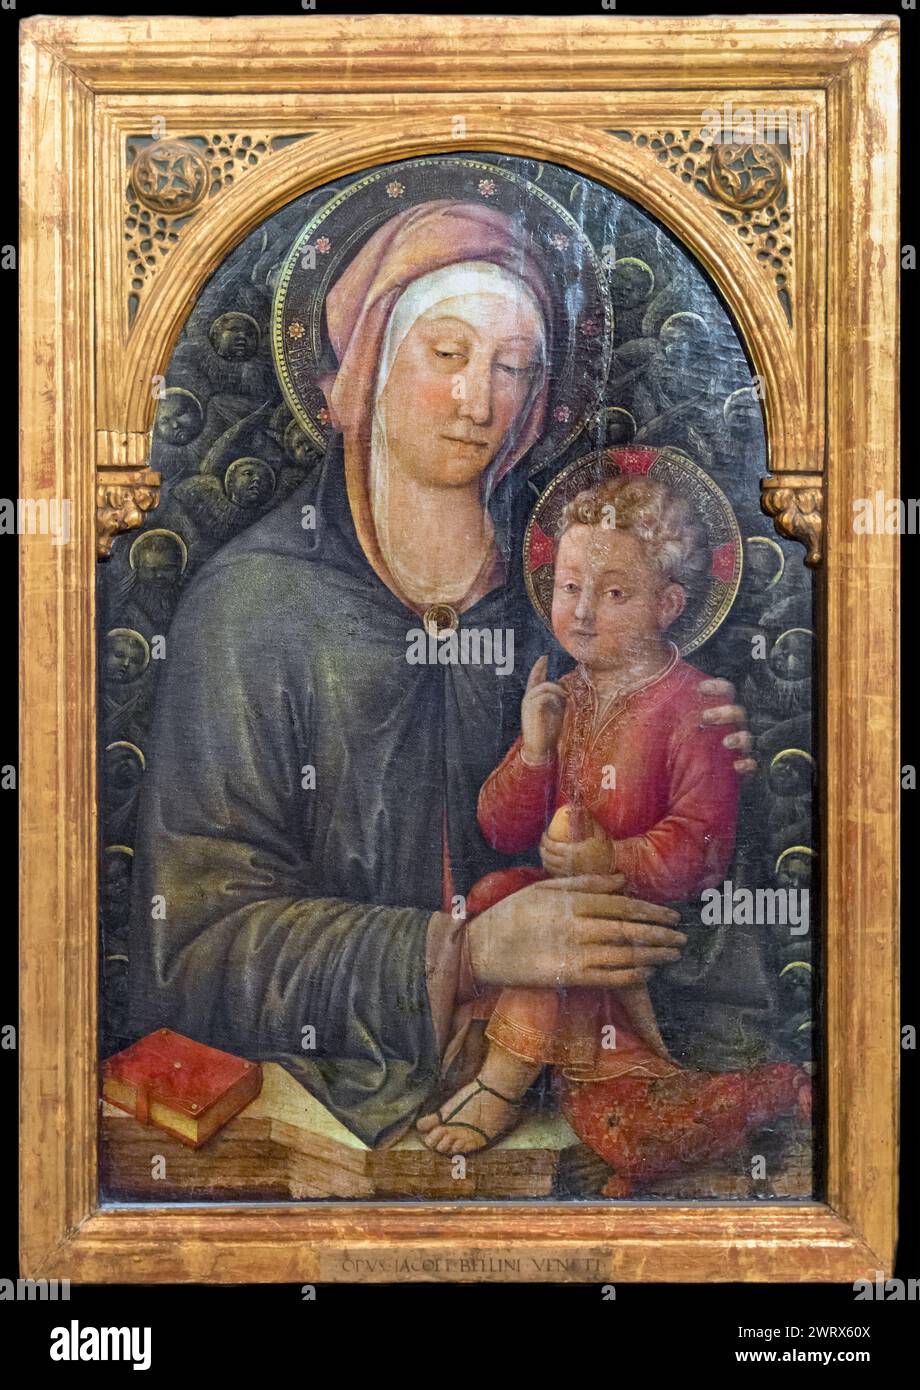 Madonna and Child Blessing (c.1455), tempera on wood, 94 x 66 cm, Gallerie dell'Accademia, Venice Jacopo Bellini Stock Photo